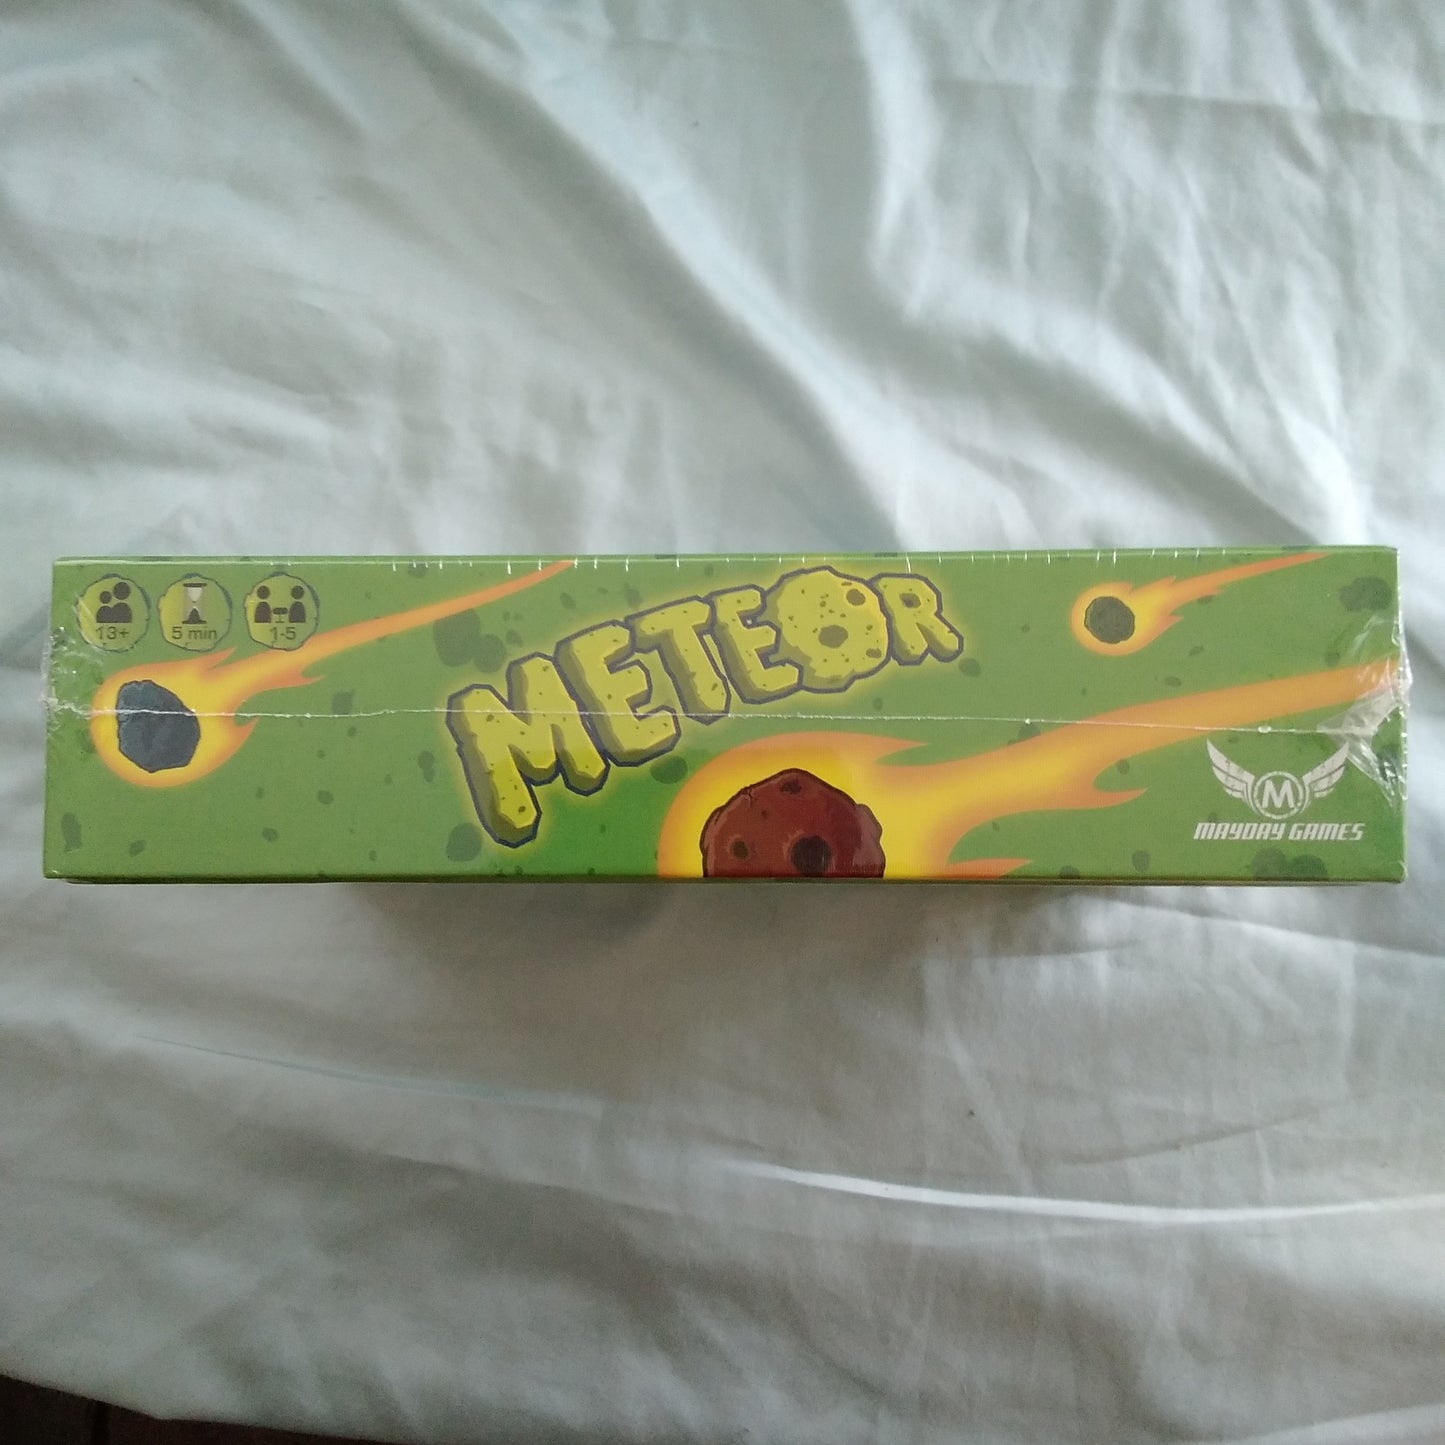 Meteor Card Game by Mayday Games - NEW